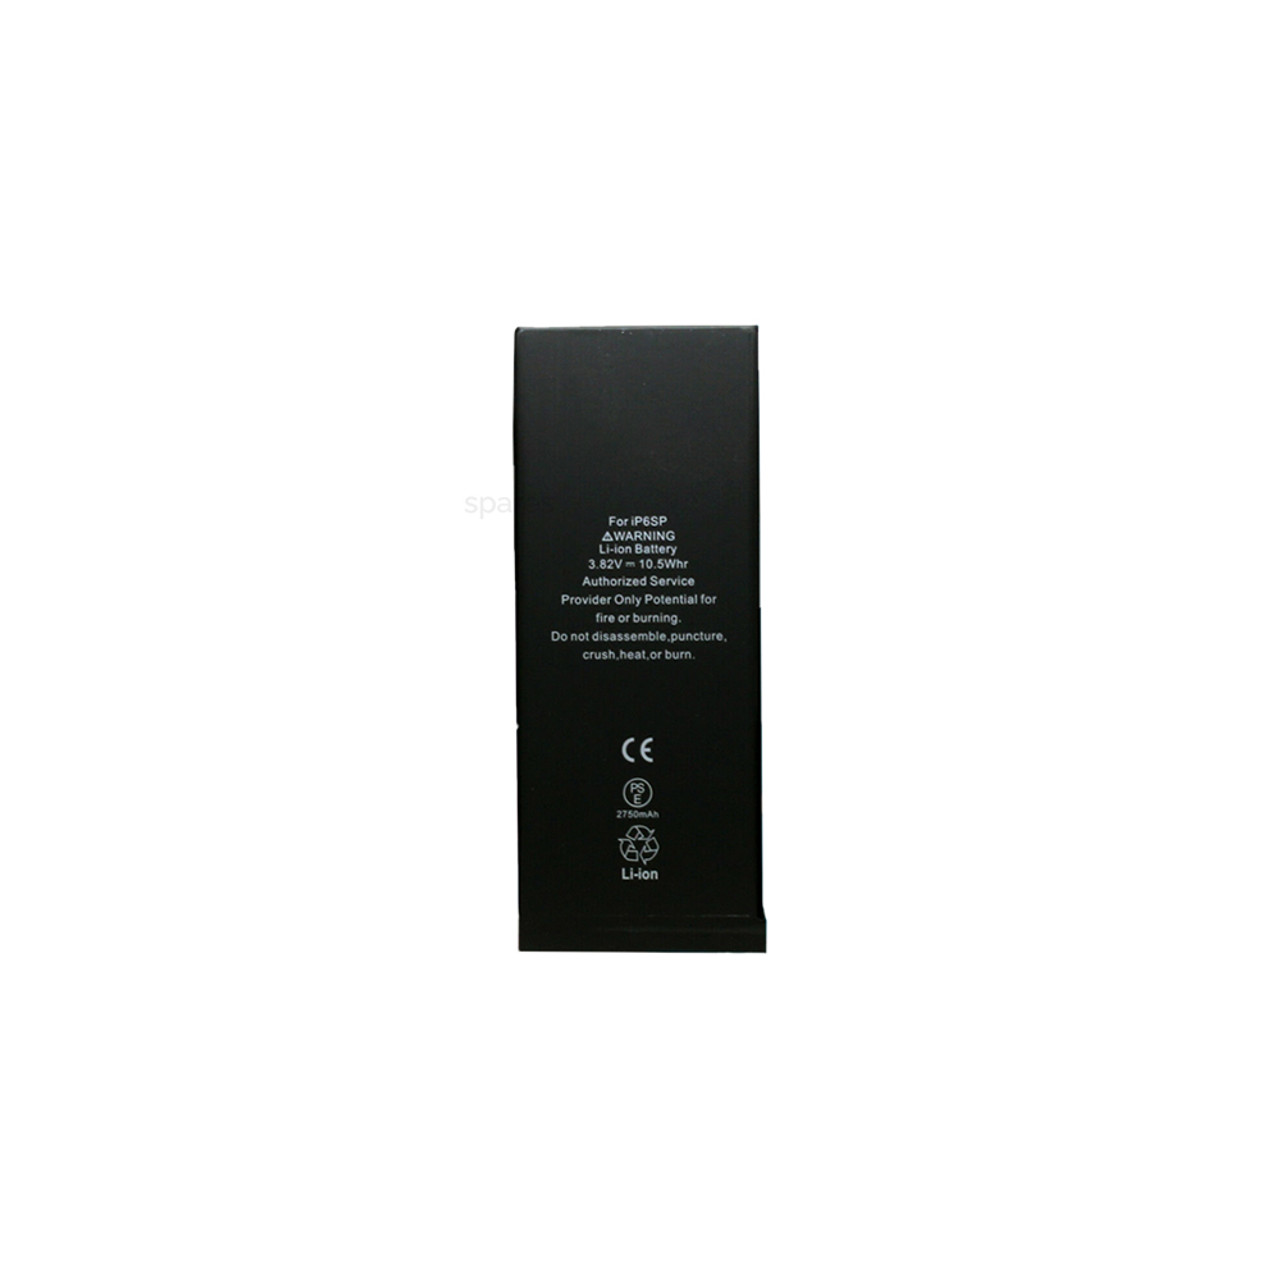 iPhone 6S Plus Battery 3.82V2750mAh Replacement